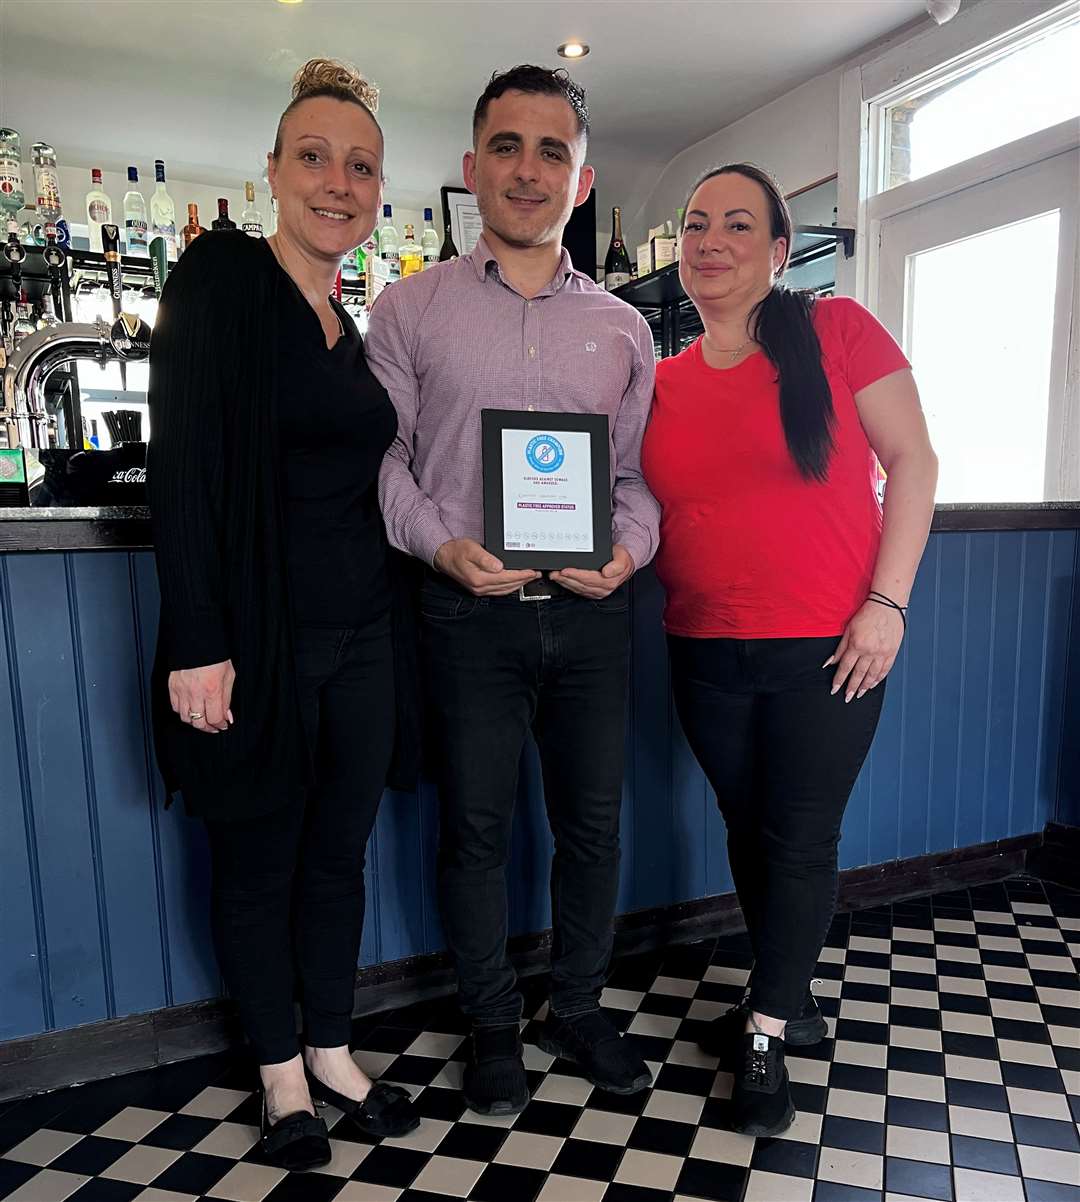 Vinni Maka of The Yeoman with his award, pictured with staff members Kelly Bailey (left), and Emma Louise Paige